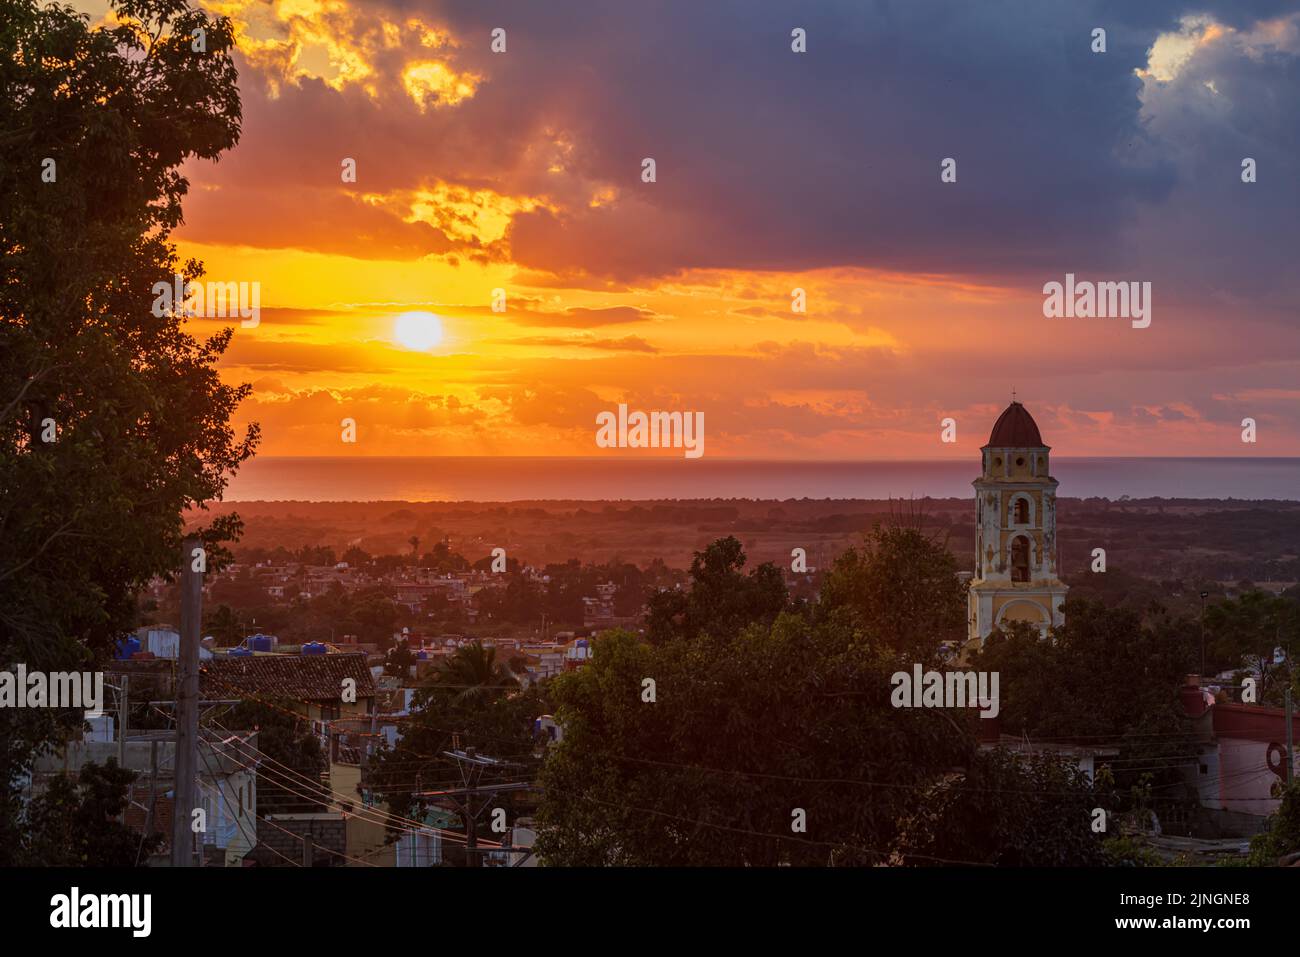 Sunset in the cityscape of Trinidad Stock Photo